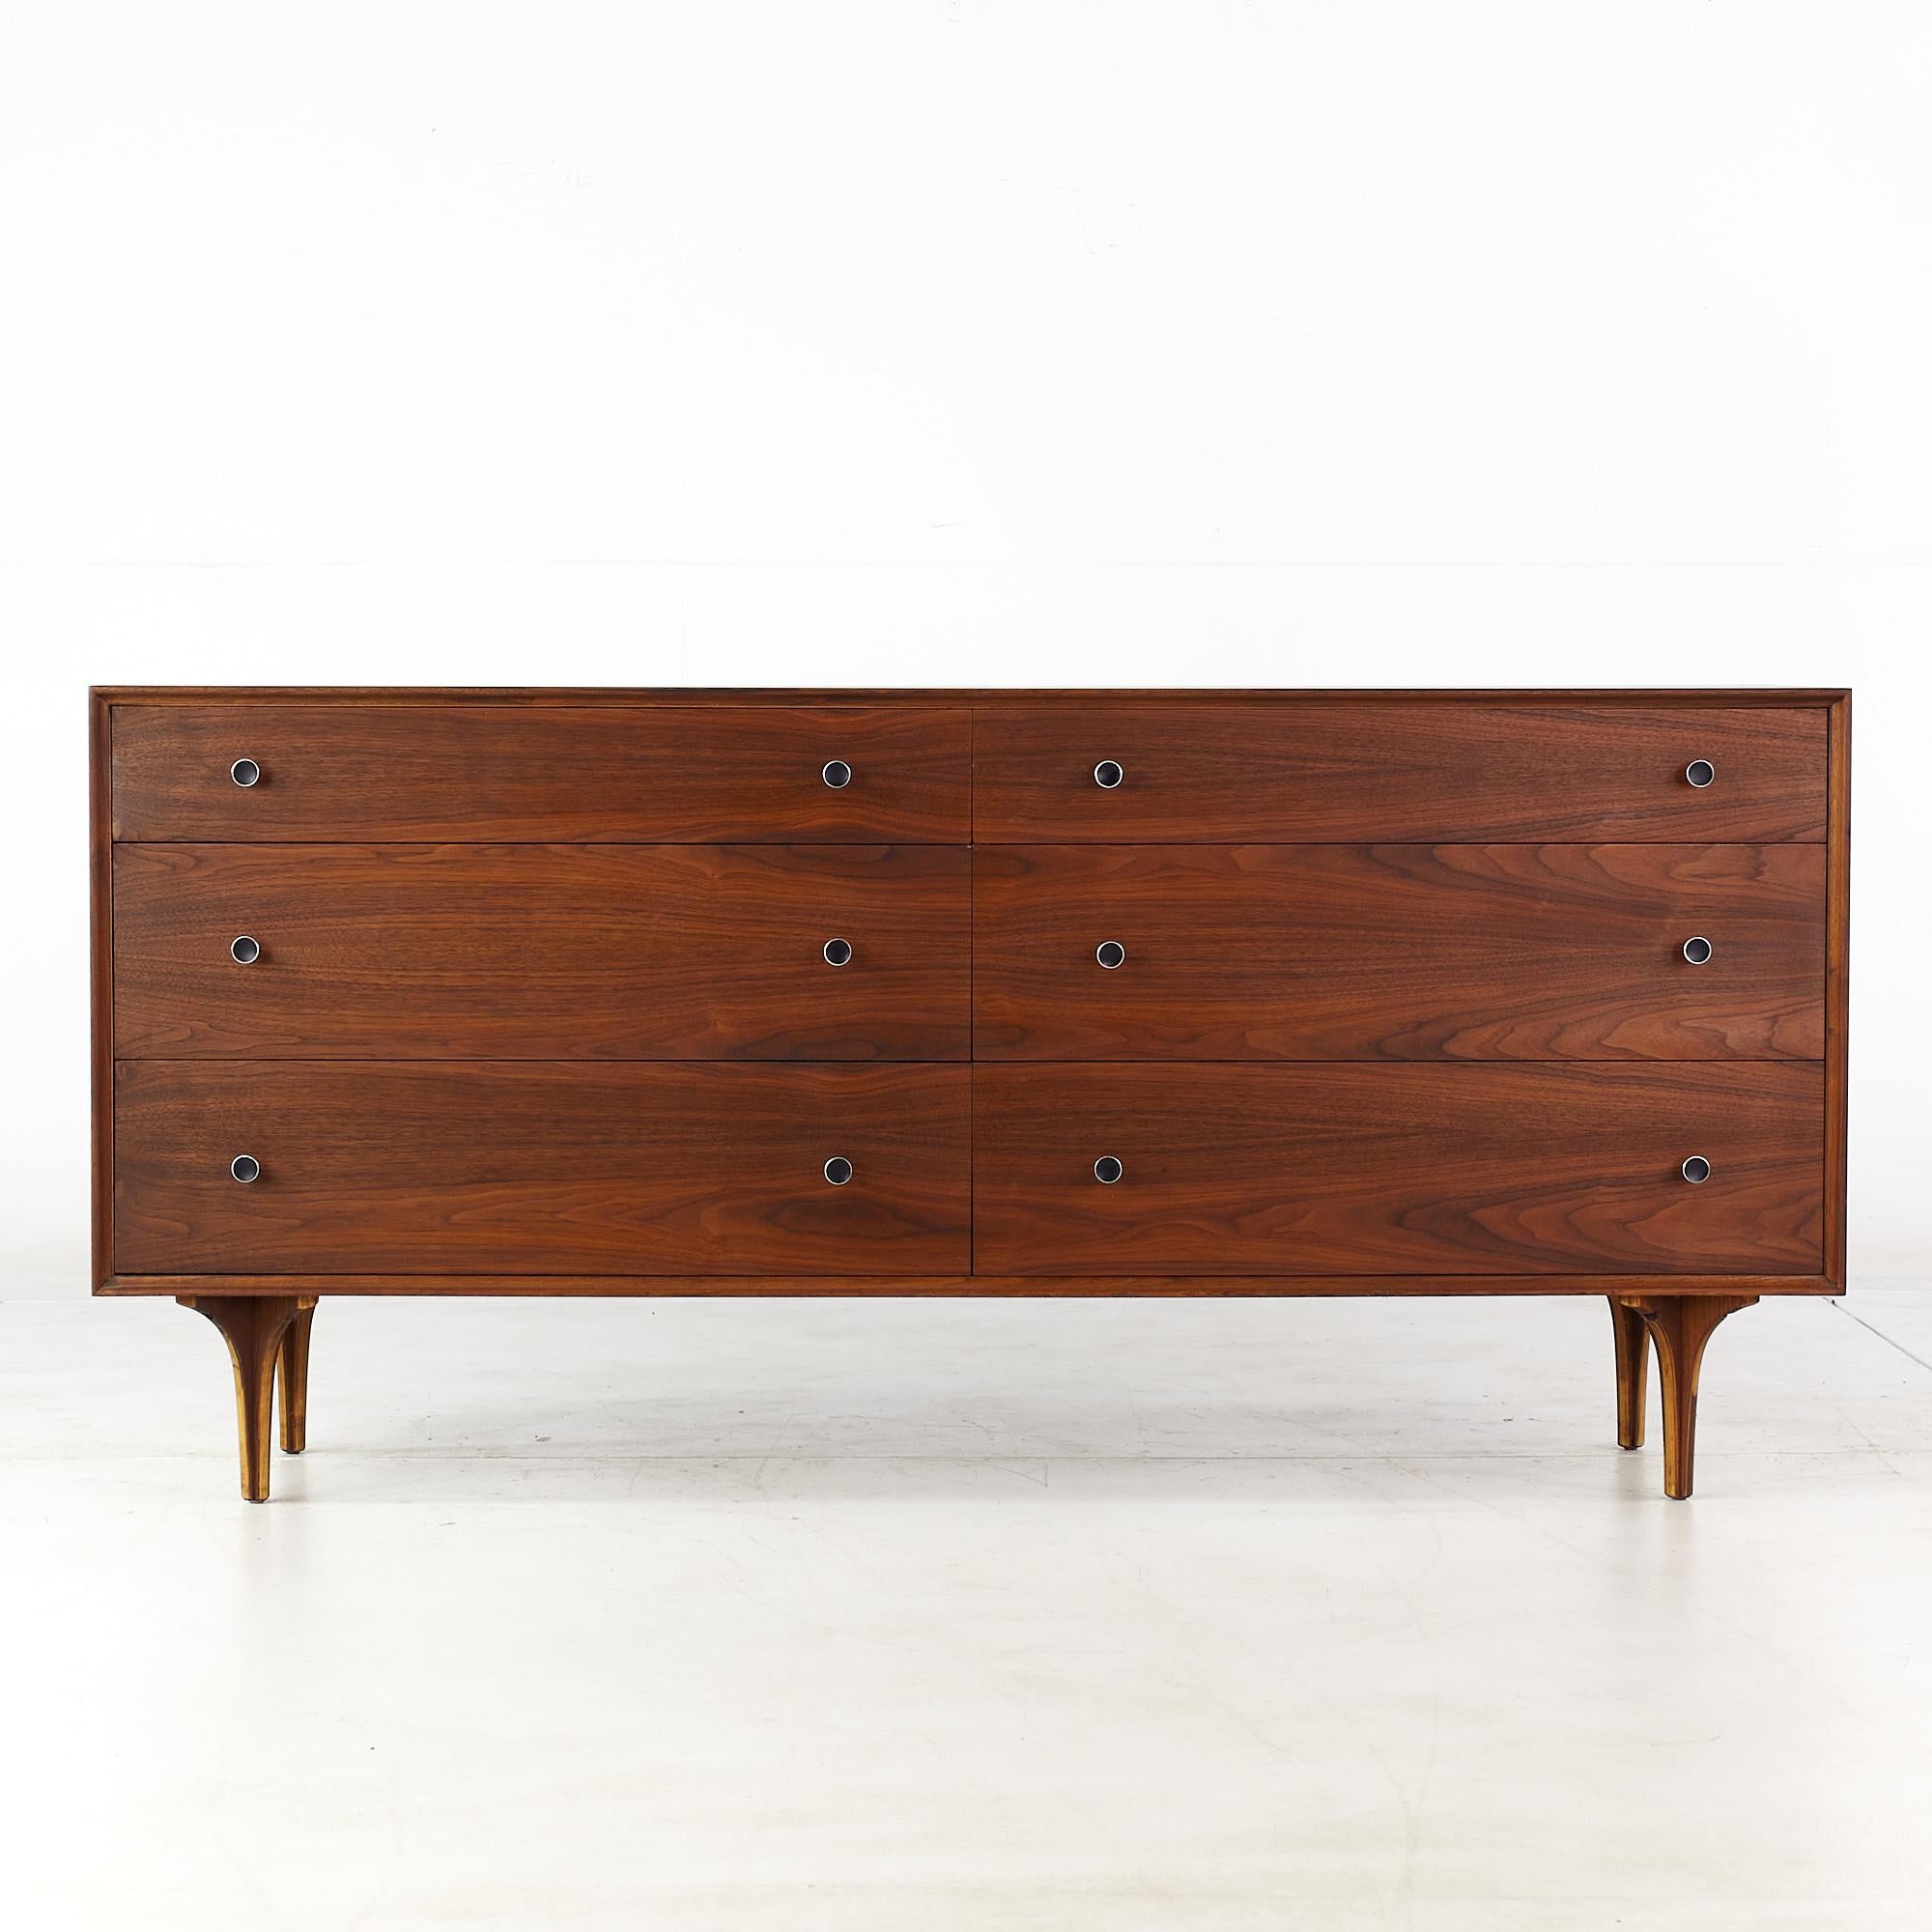 Glenn of California Mid Century rosewood 6 drawer dresser in the style of Milo Baughman

This dresser measures: 64.75 wide x 17.75 deep x 30.5 inches high

All pieces of furniture can be had in what we call restored vintage condition. That means the